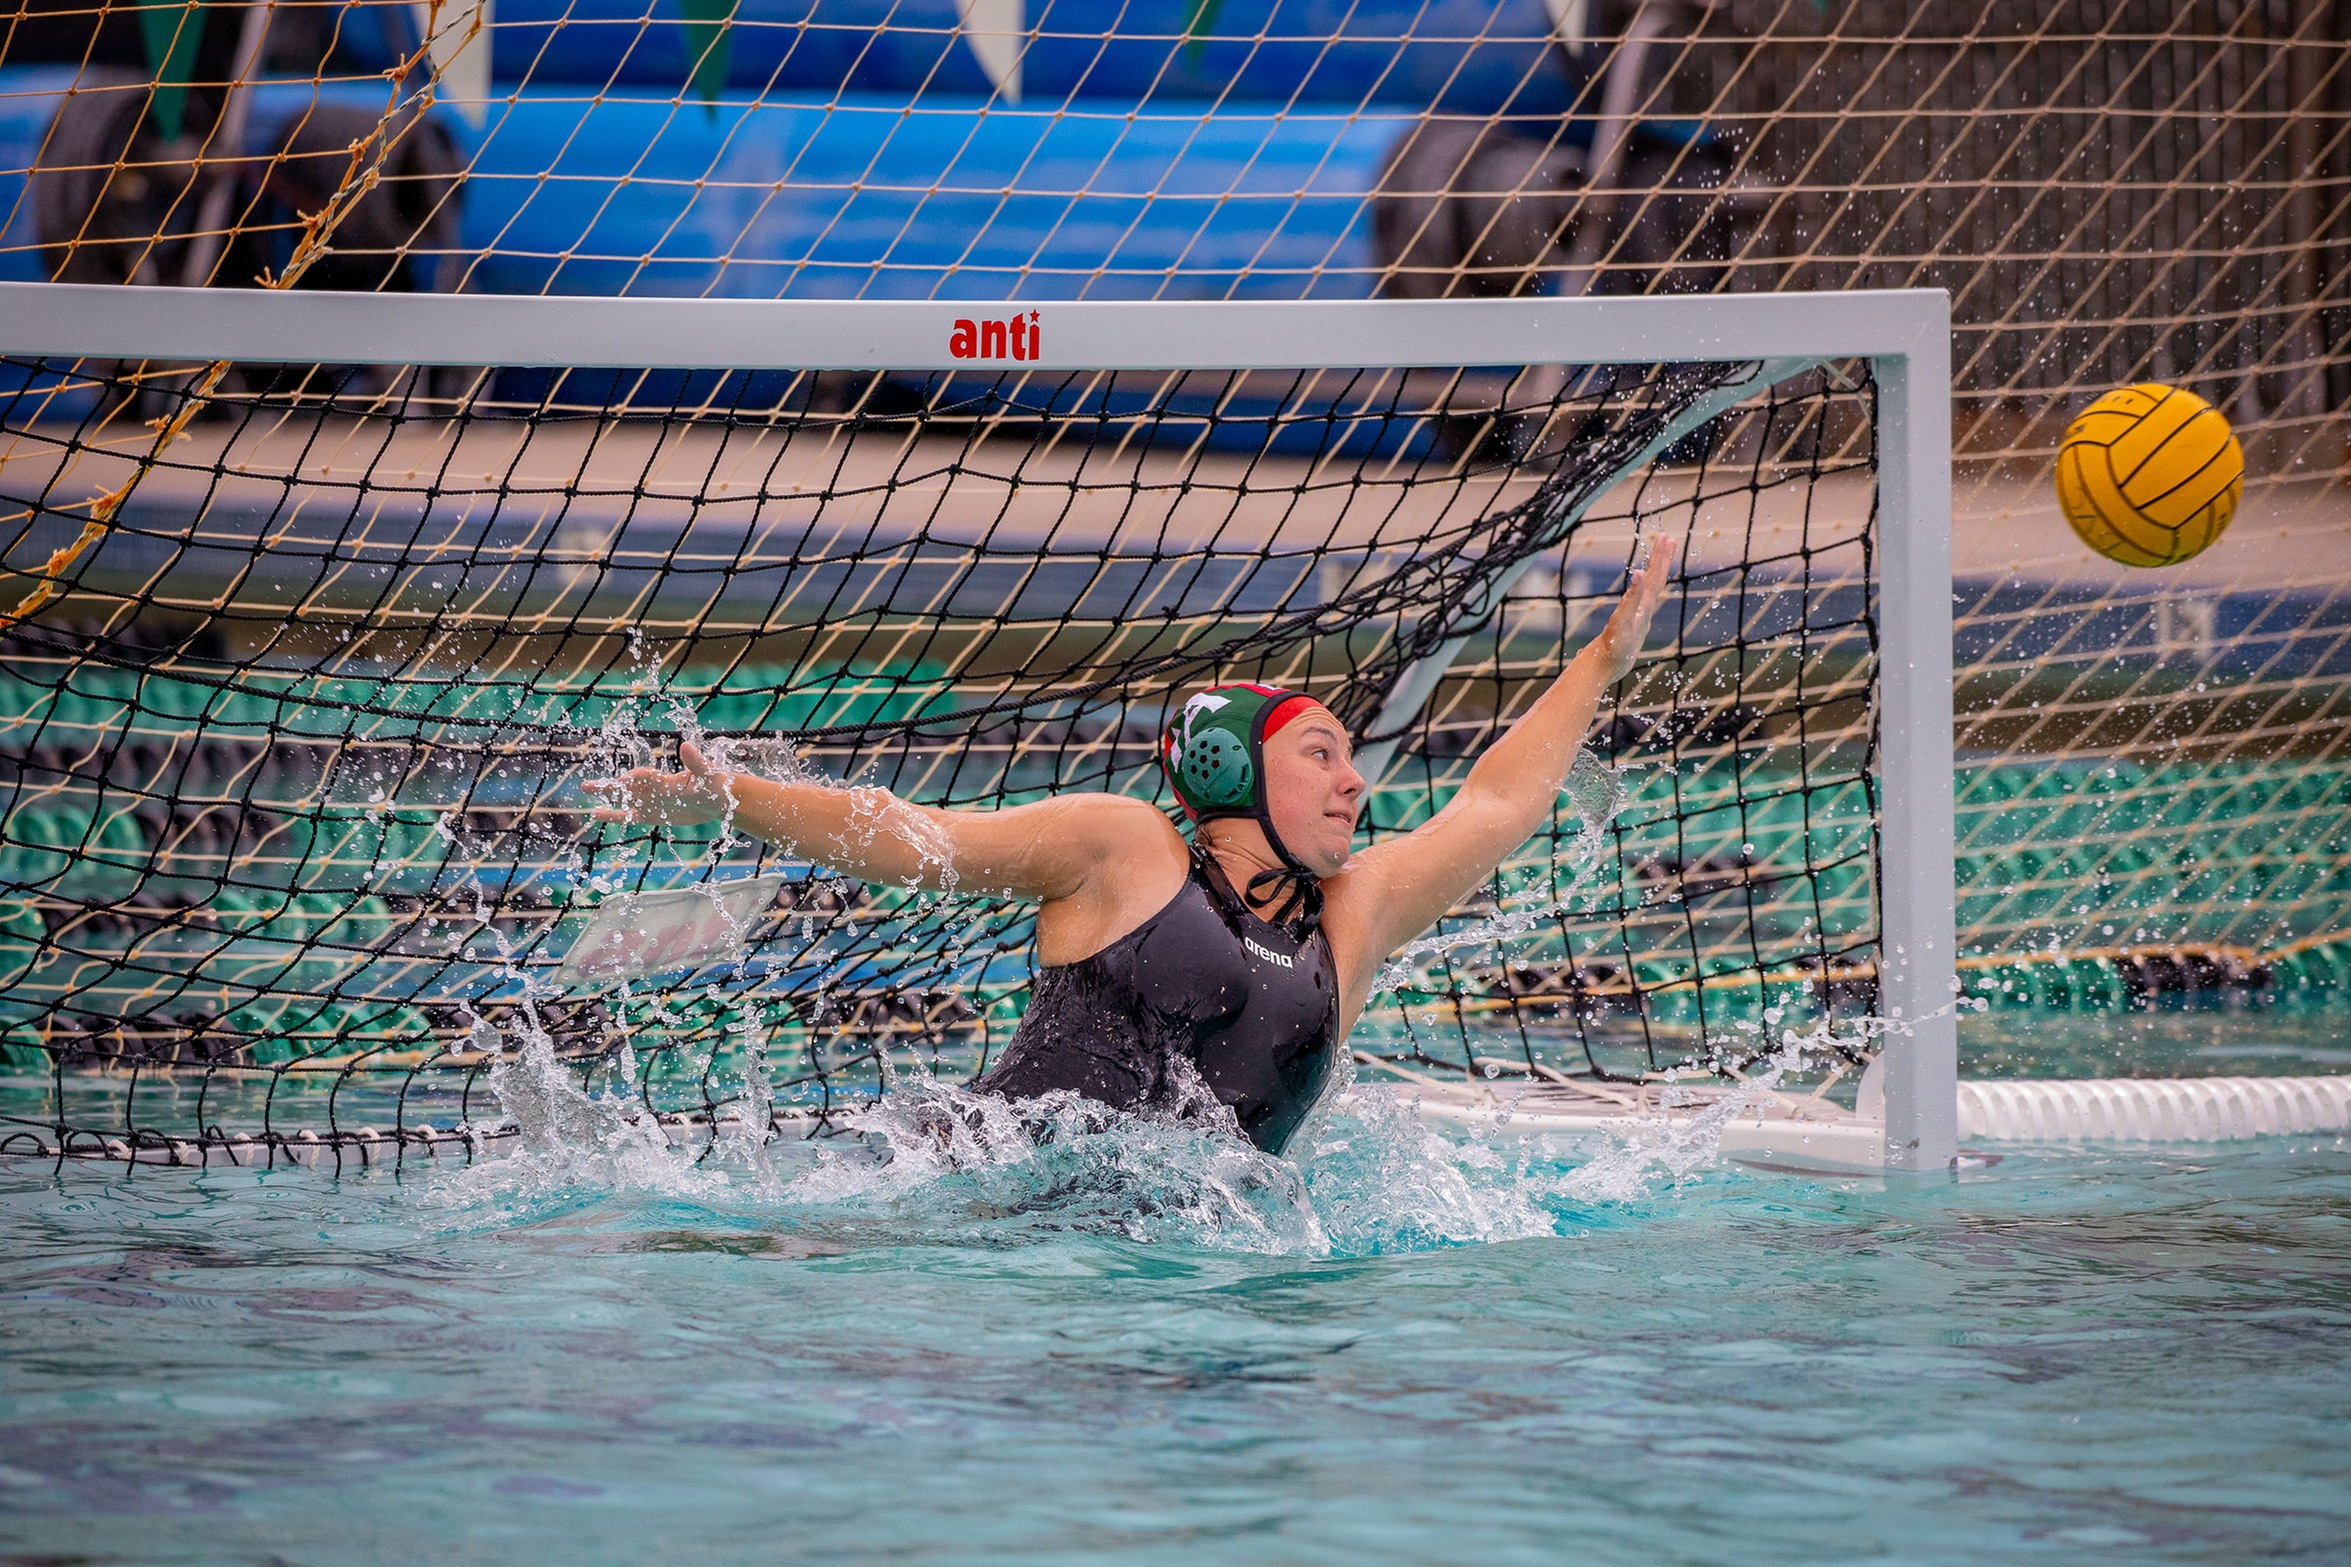 Women's Water Polo goes 2-5 last week with wins over Rio Hondo & Southwestern